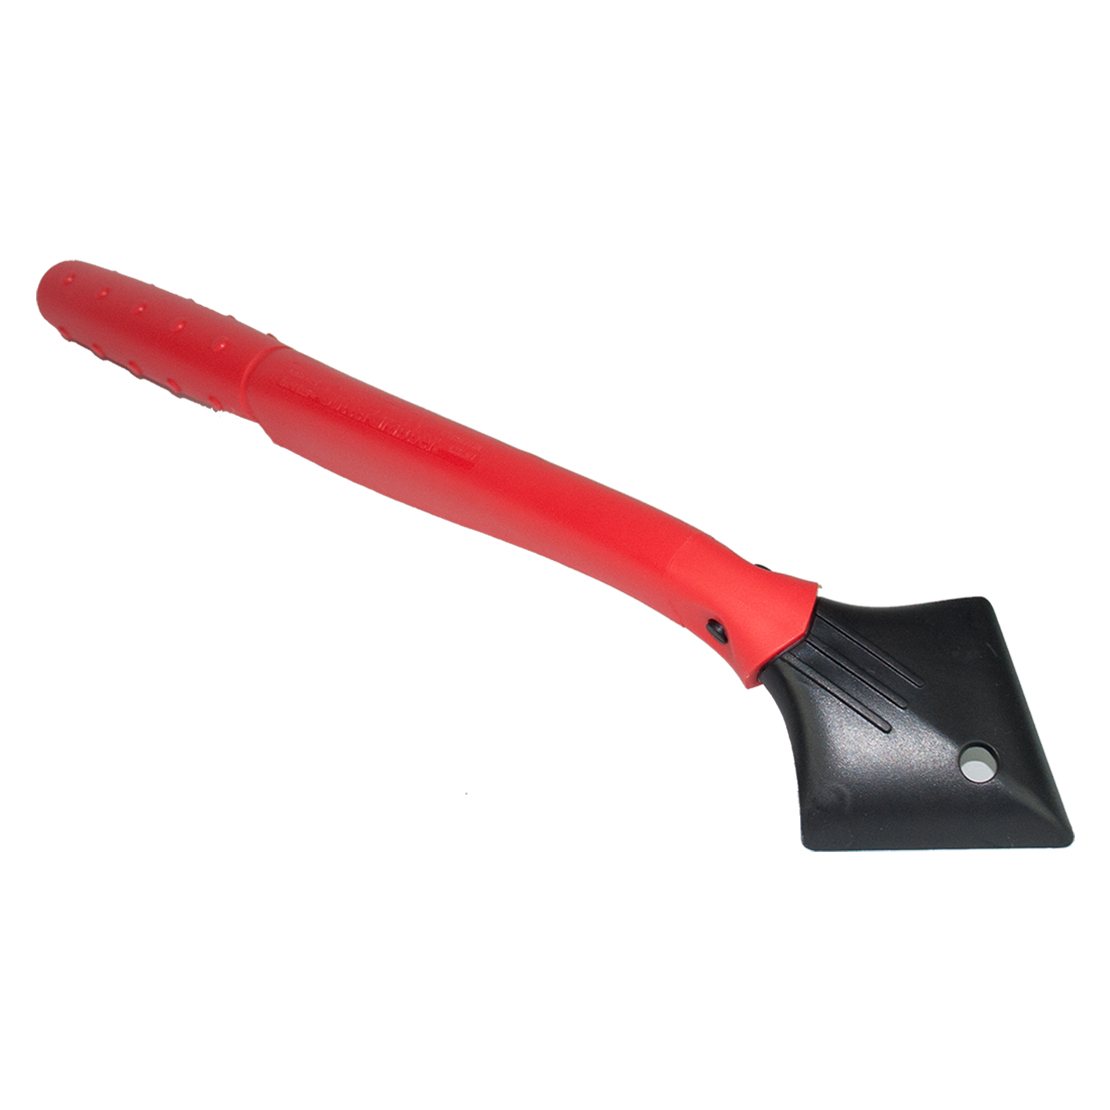 Working Products Gutter Grabber Gutter Cleaning Service WCR – 